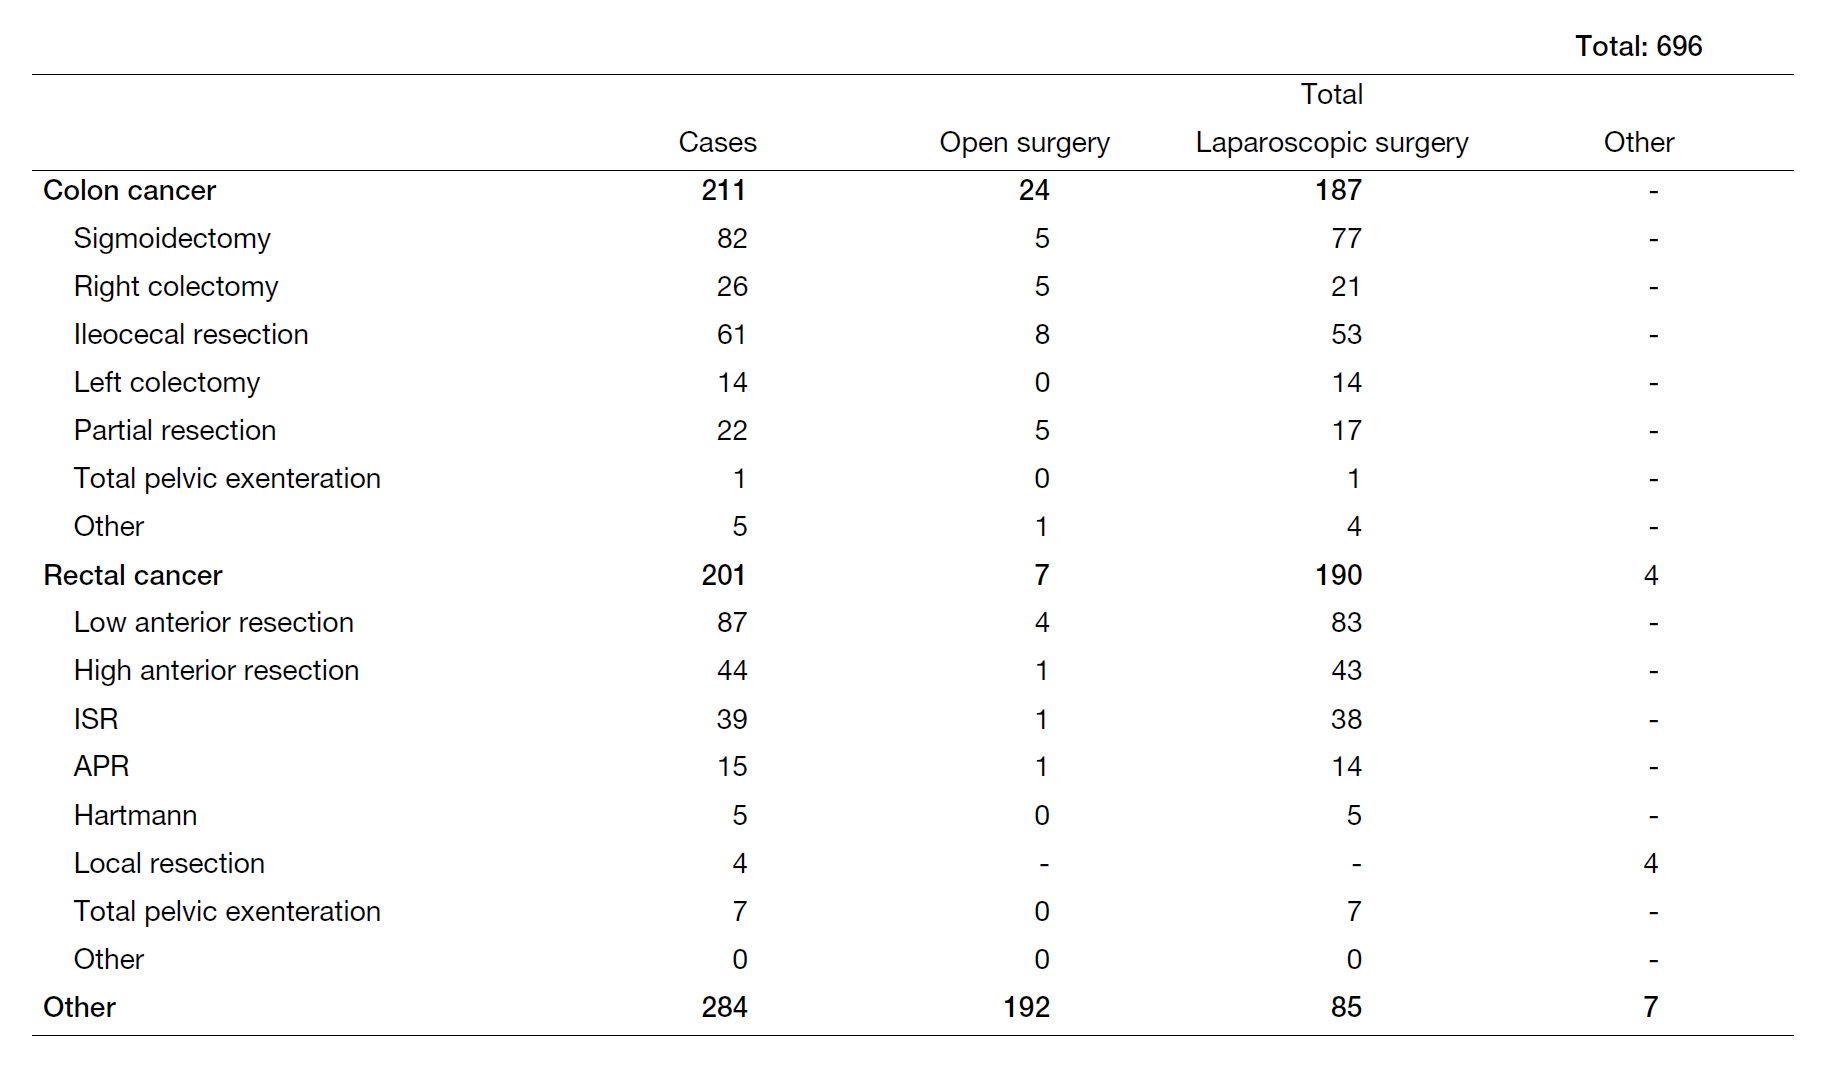 Table 1. Number of surgical cases from Apr. 2022 to Mar. 2023